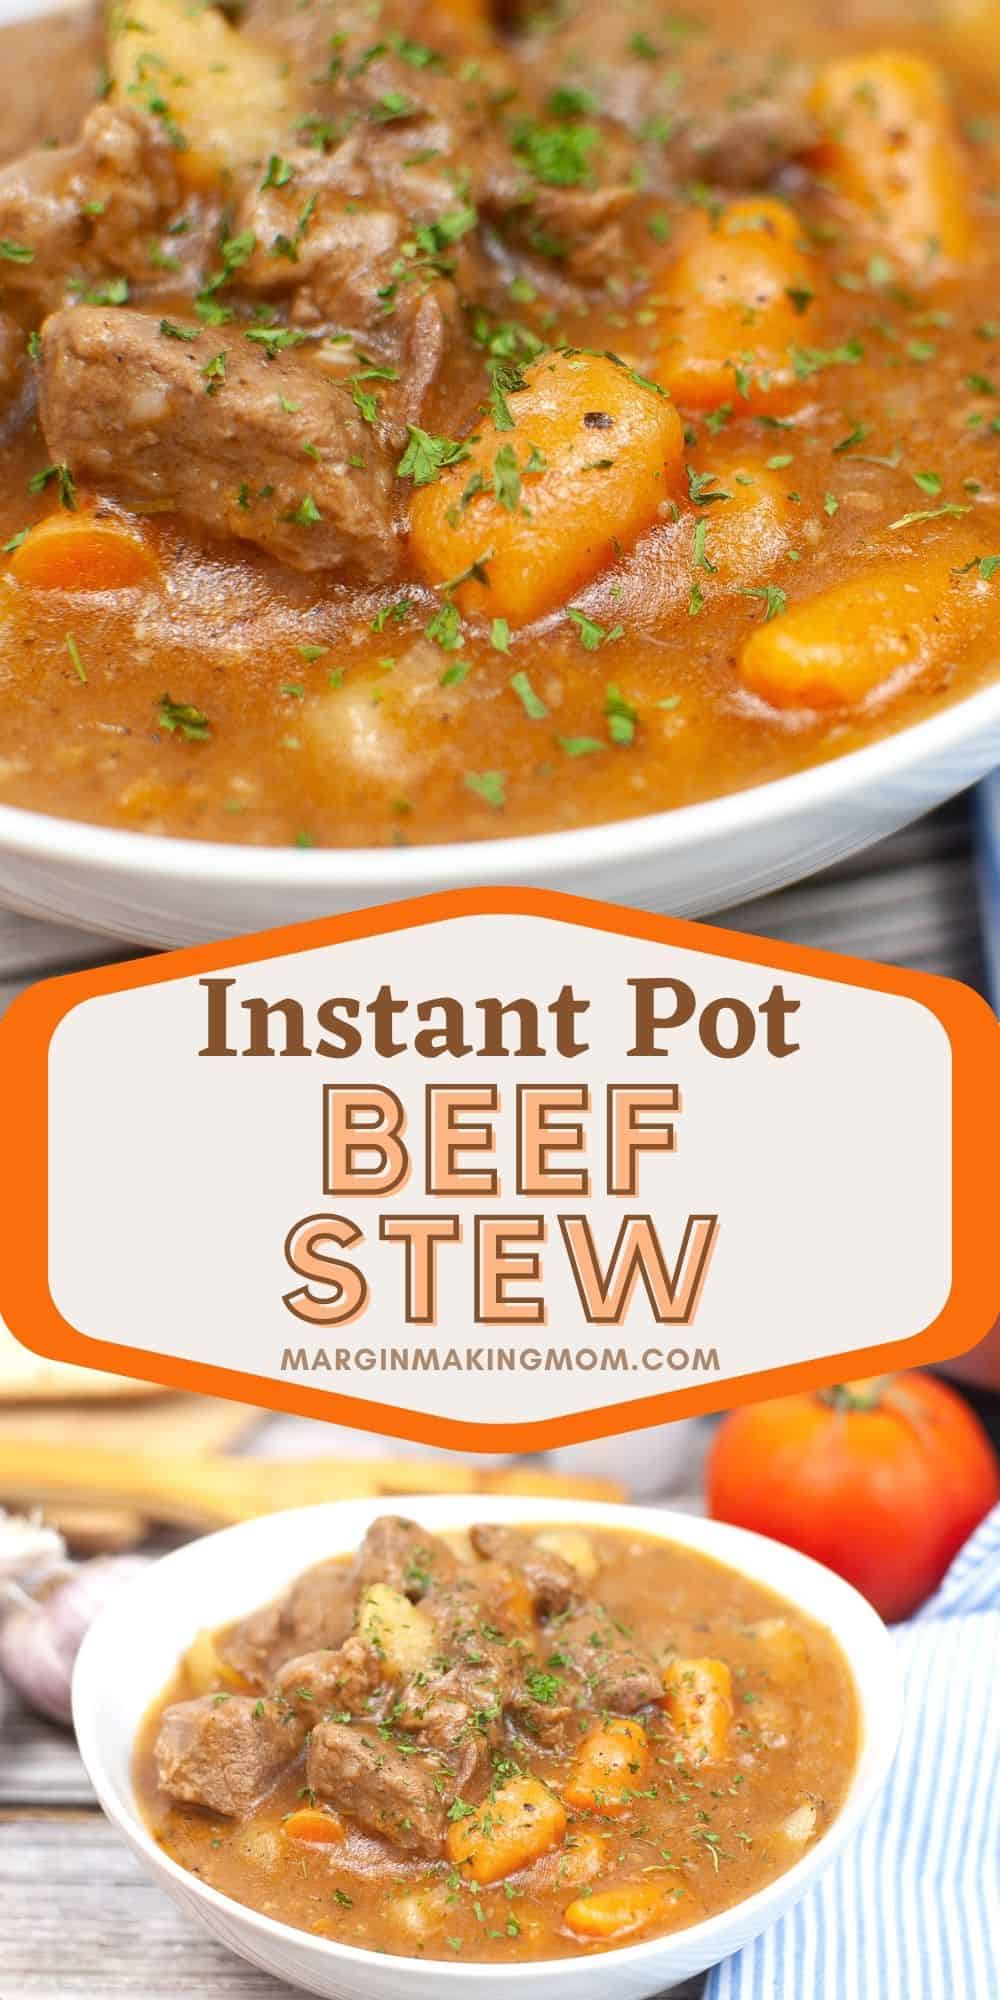 collage image featuring two photos of pressure cooker beef stew. The top photo is a close-up of Instant Pot beef stew in a white bowl, and the bottom picture is farther away